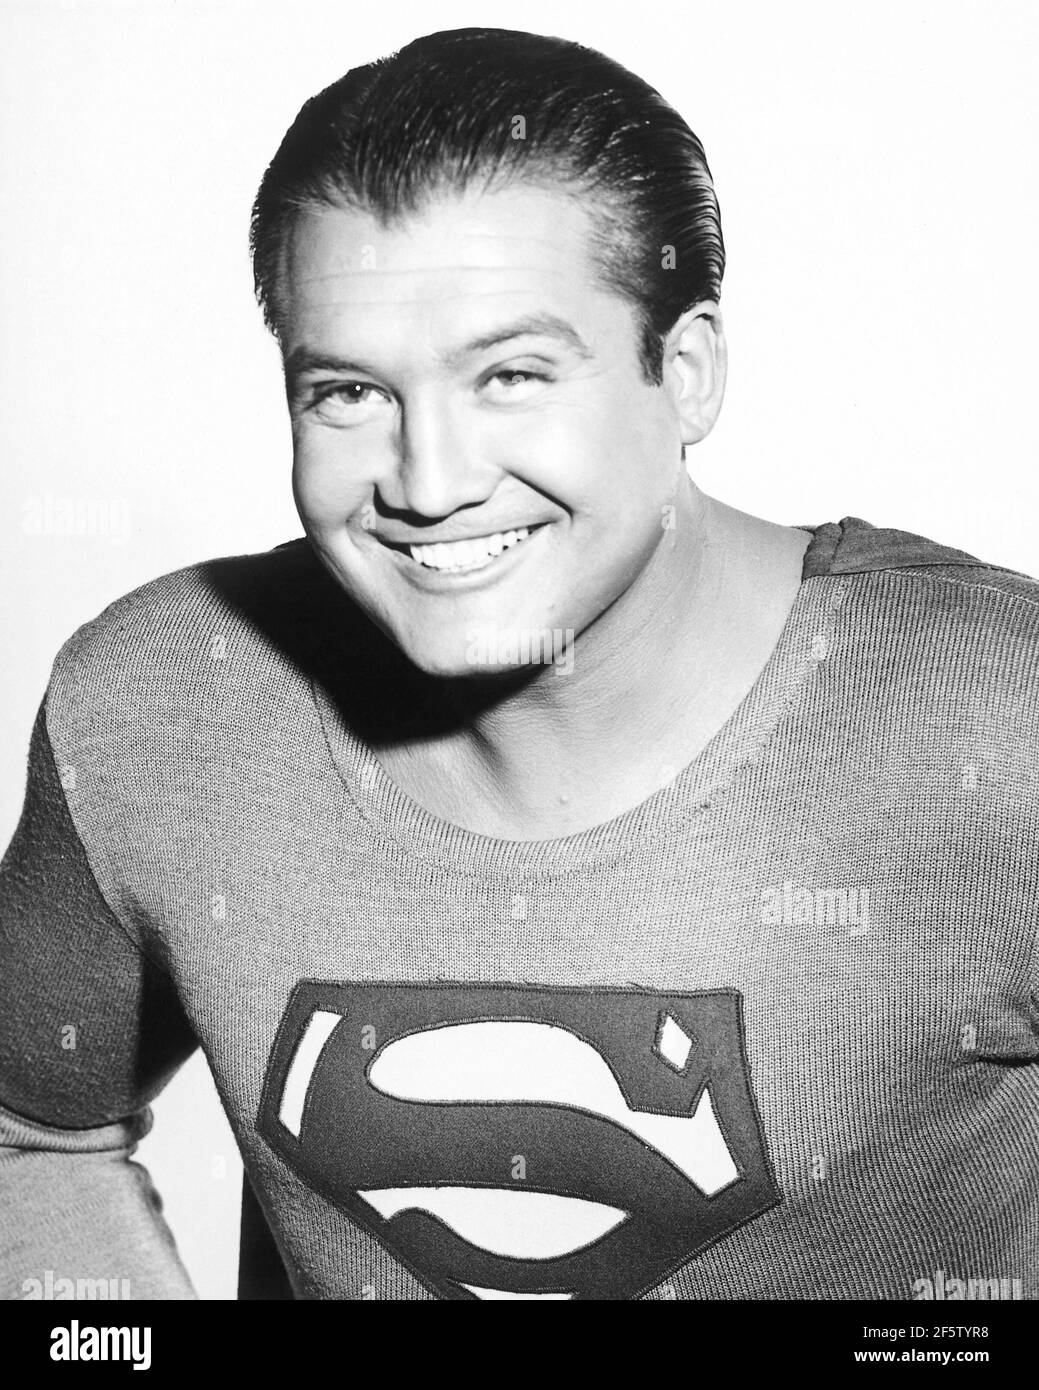 GEORGE REEVES in ADVENTURES OF SUPERMAN (1952), directed by GEORGE BLAIR, LEE SHOLEM and THOMAS CARR. Credit: Superman Inc. / Album Stock Photo